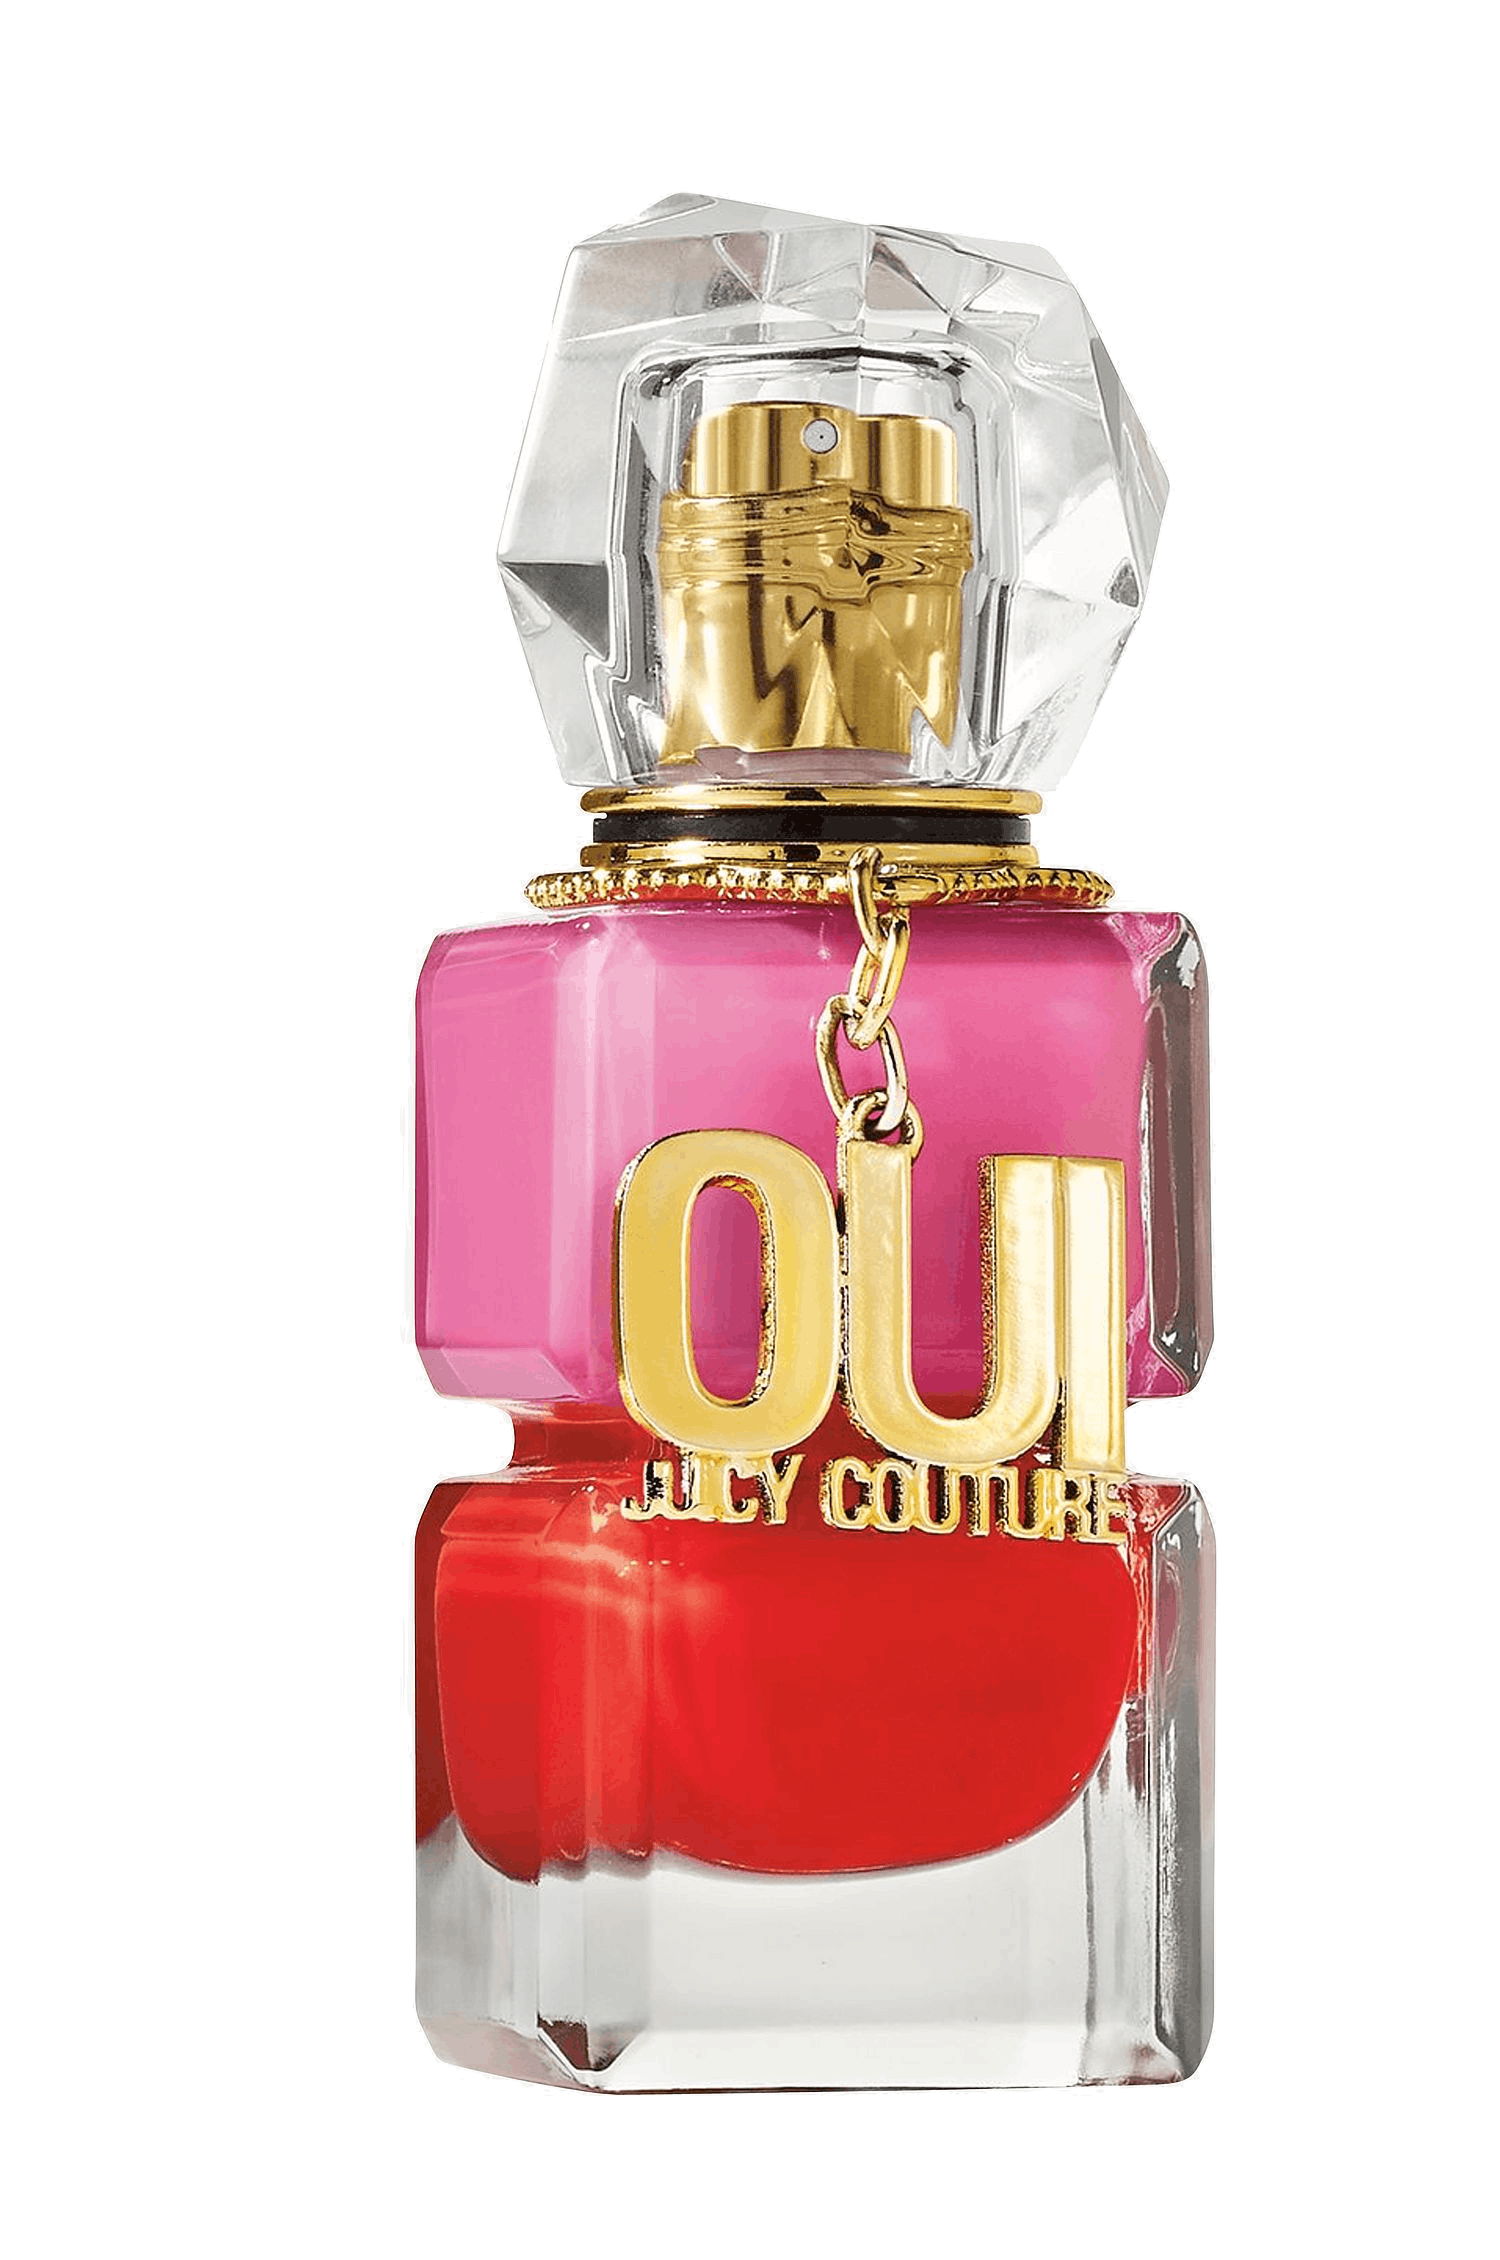 juicy couture oui edp 50 ml